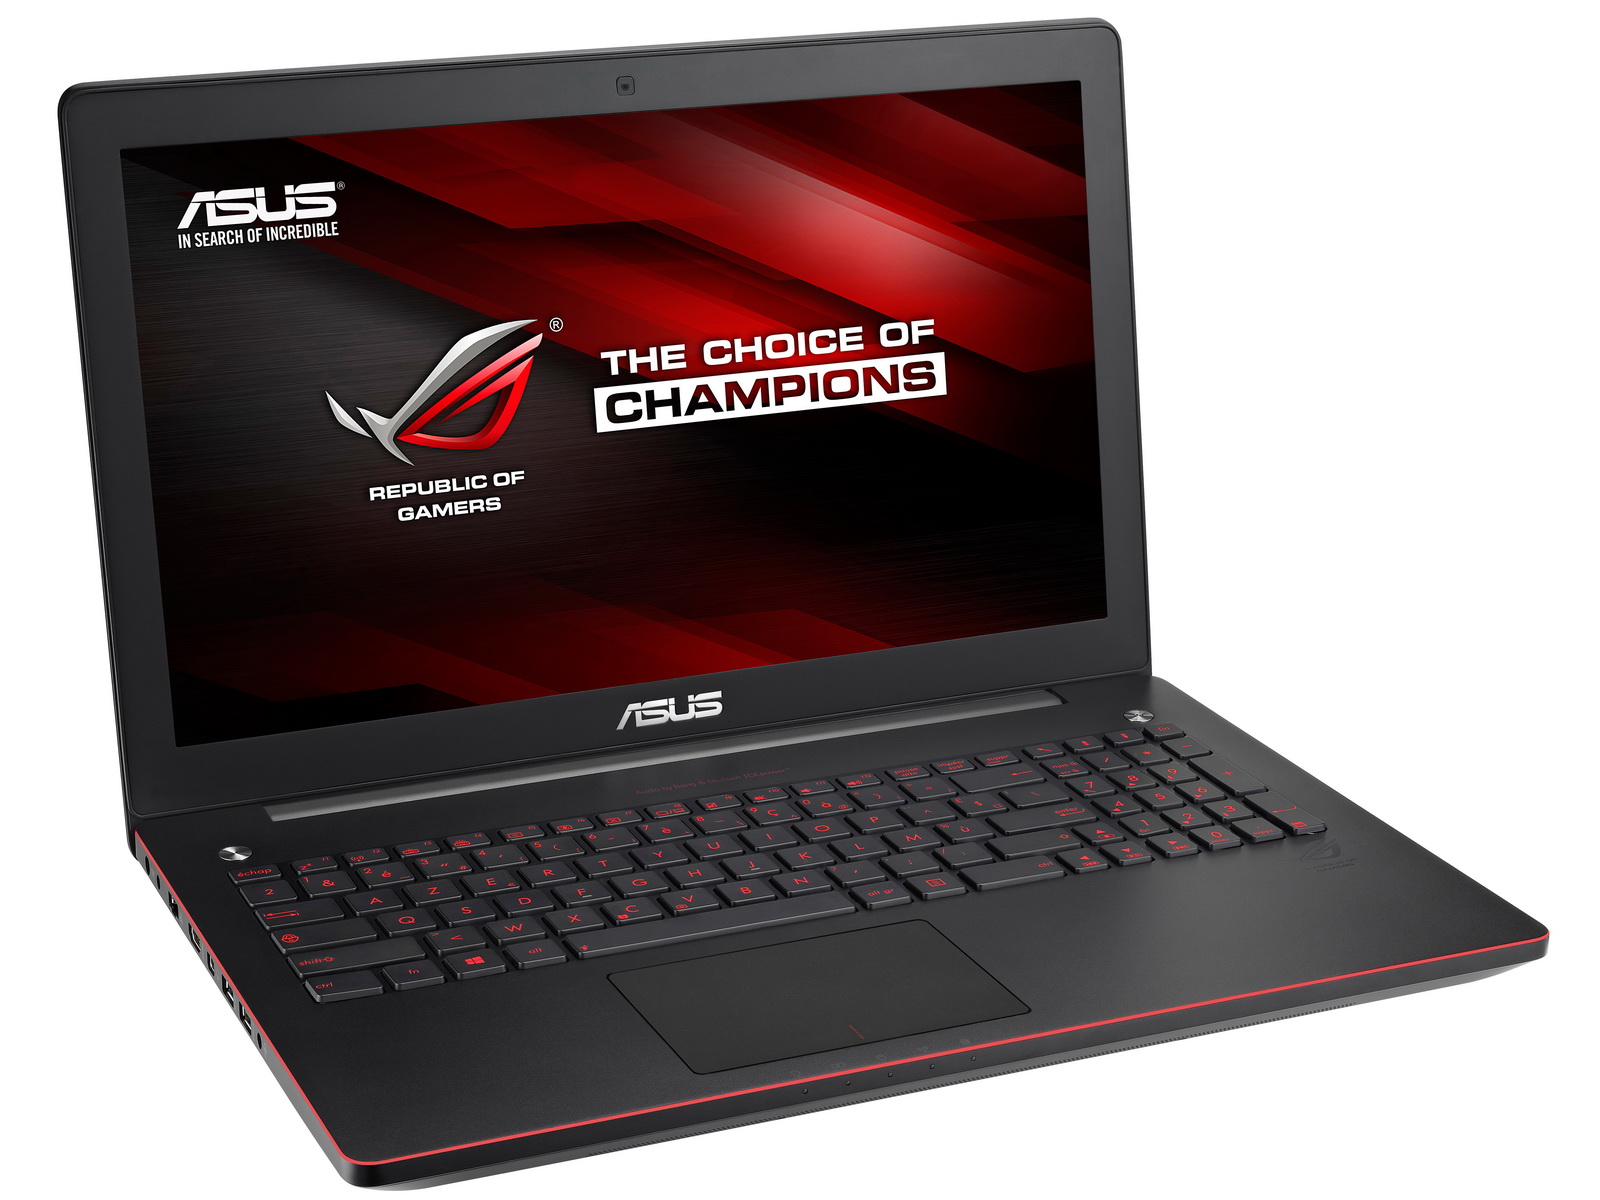 asus drivers for windows 7 64 bit